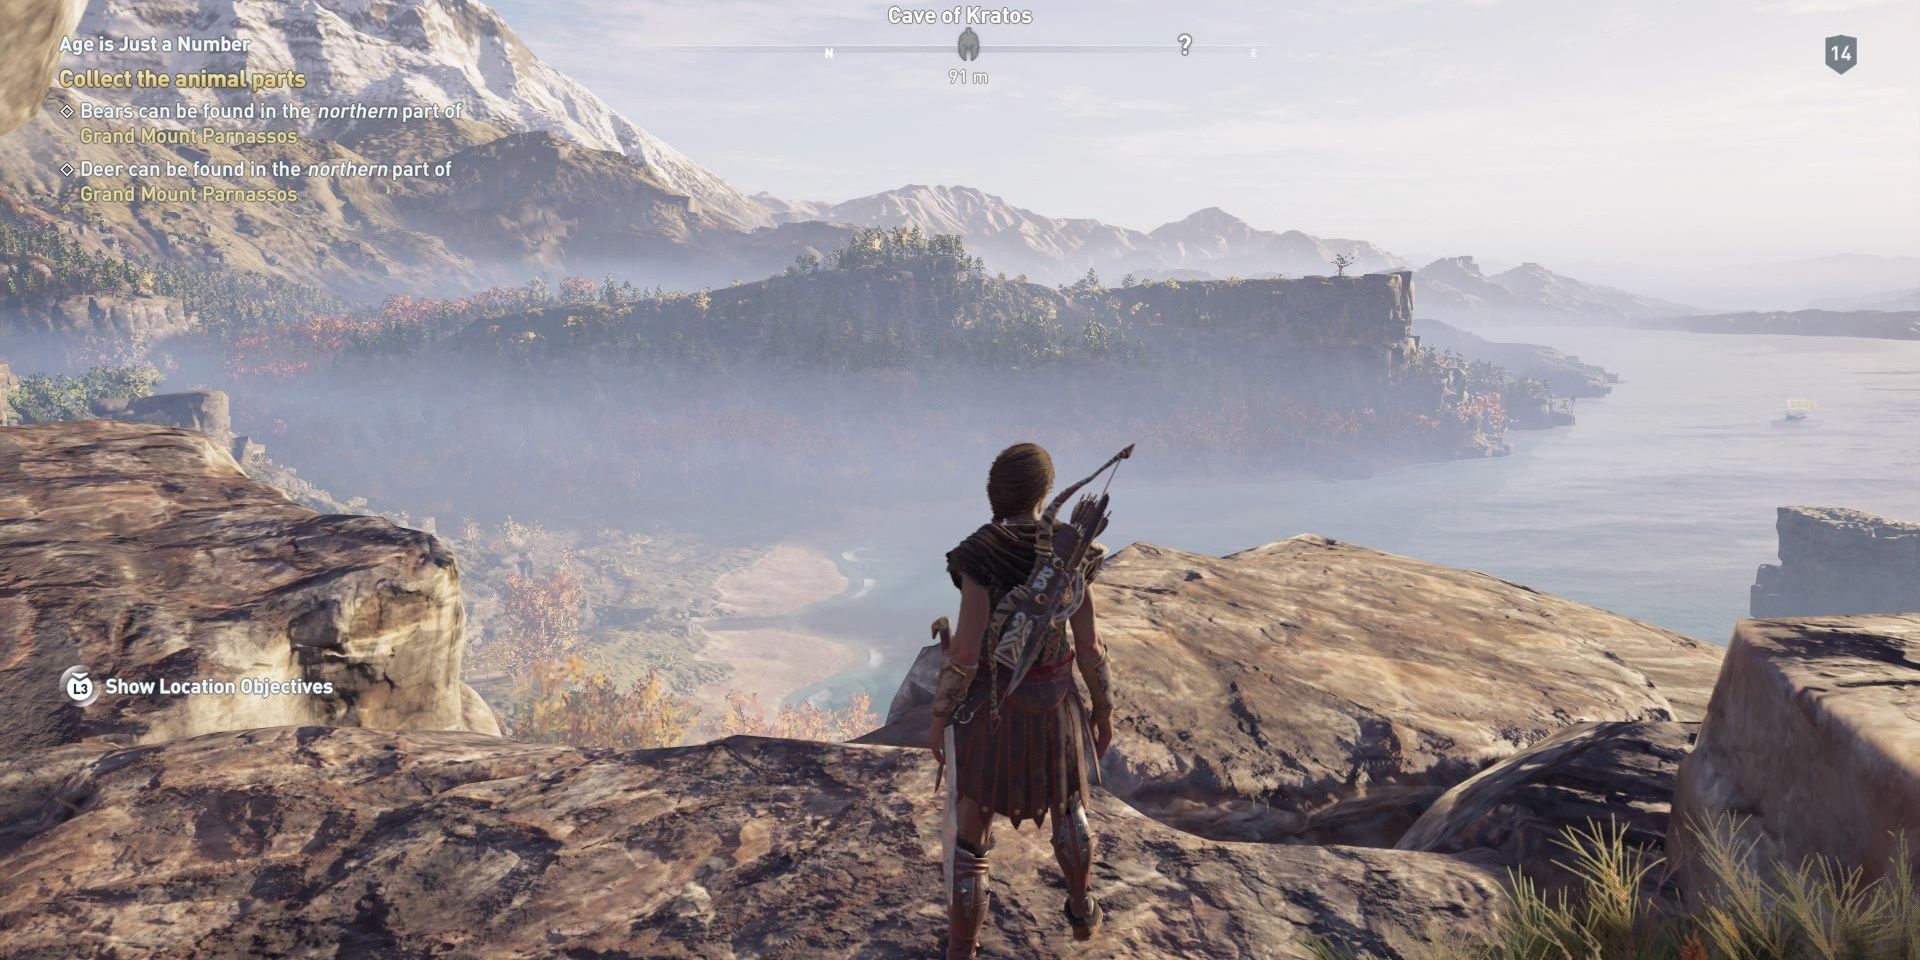 The Cave of Kratos Location From AC Odyssey